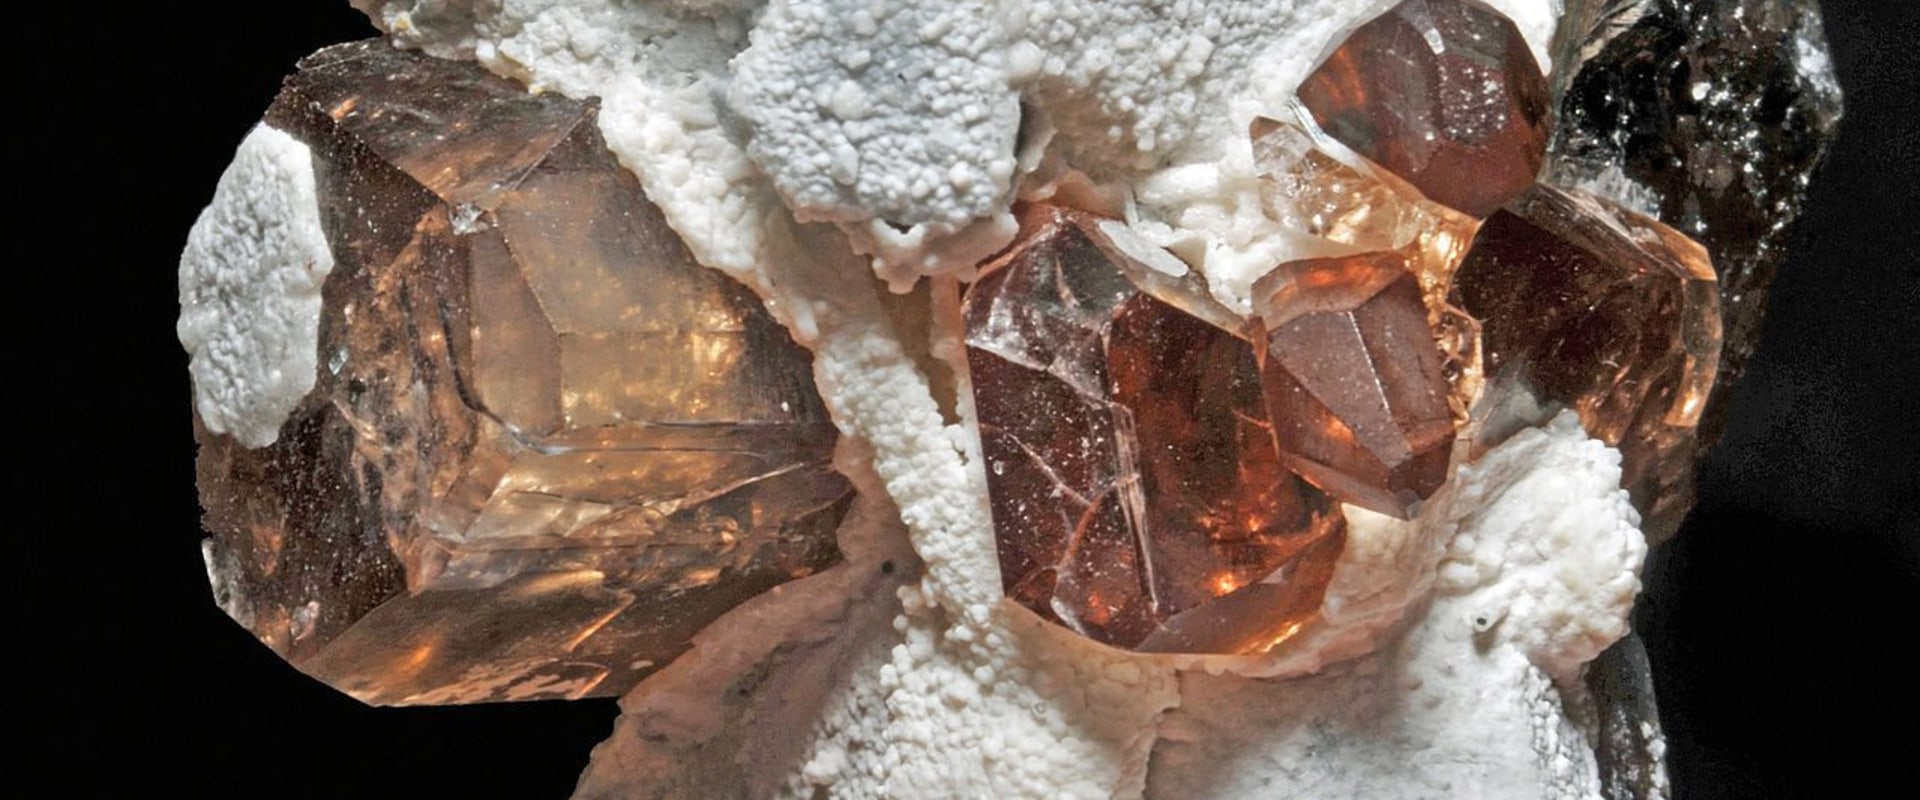 Are crystals formed by heat?